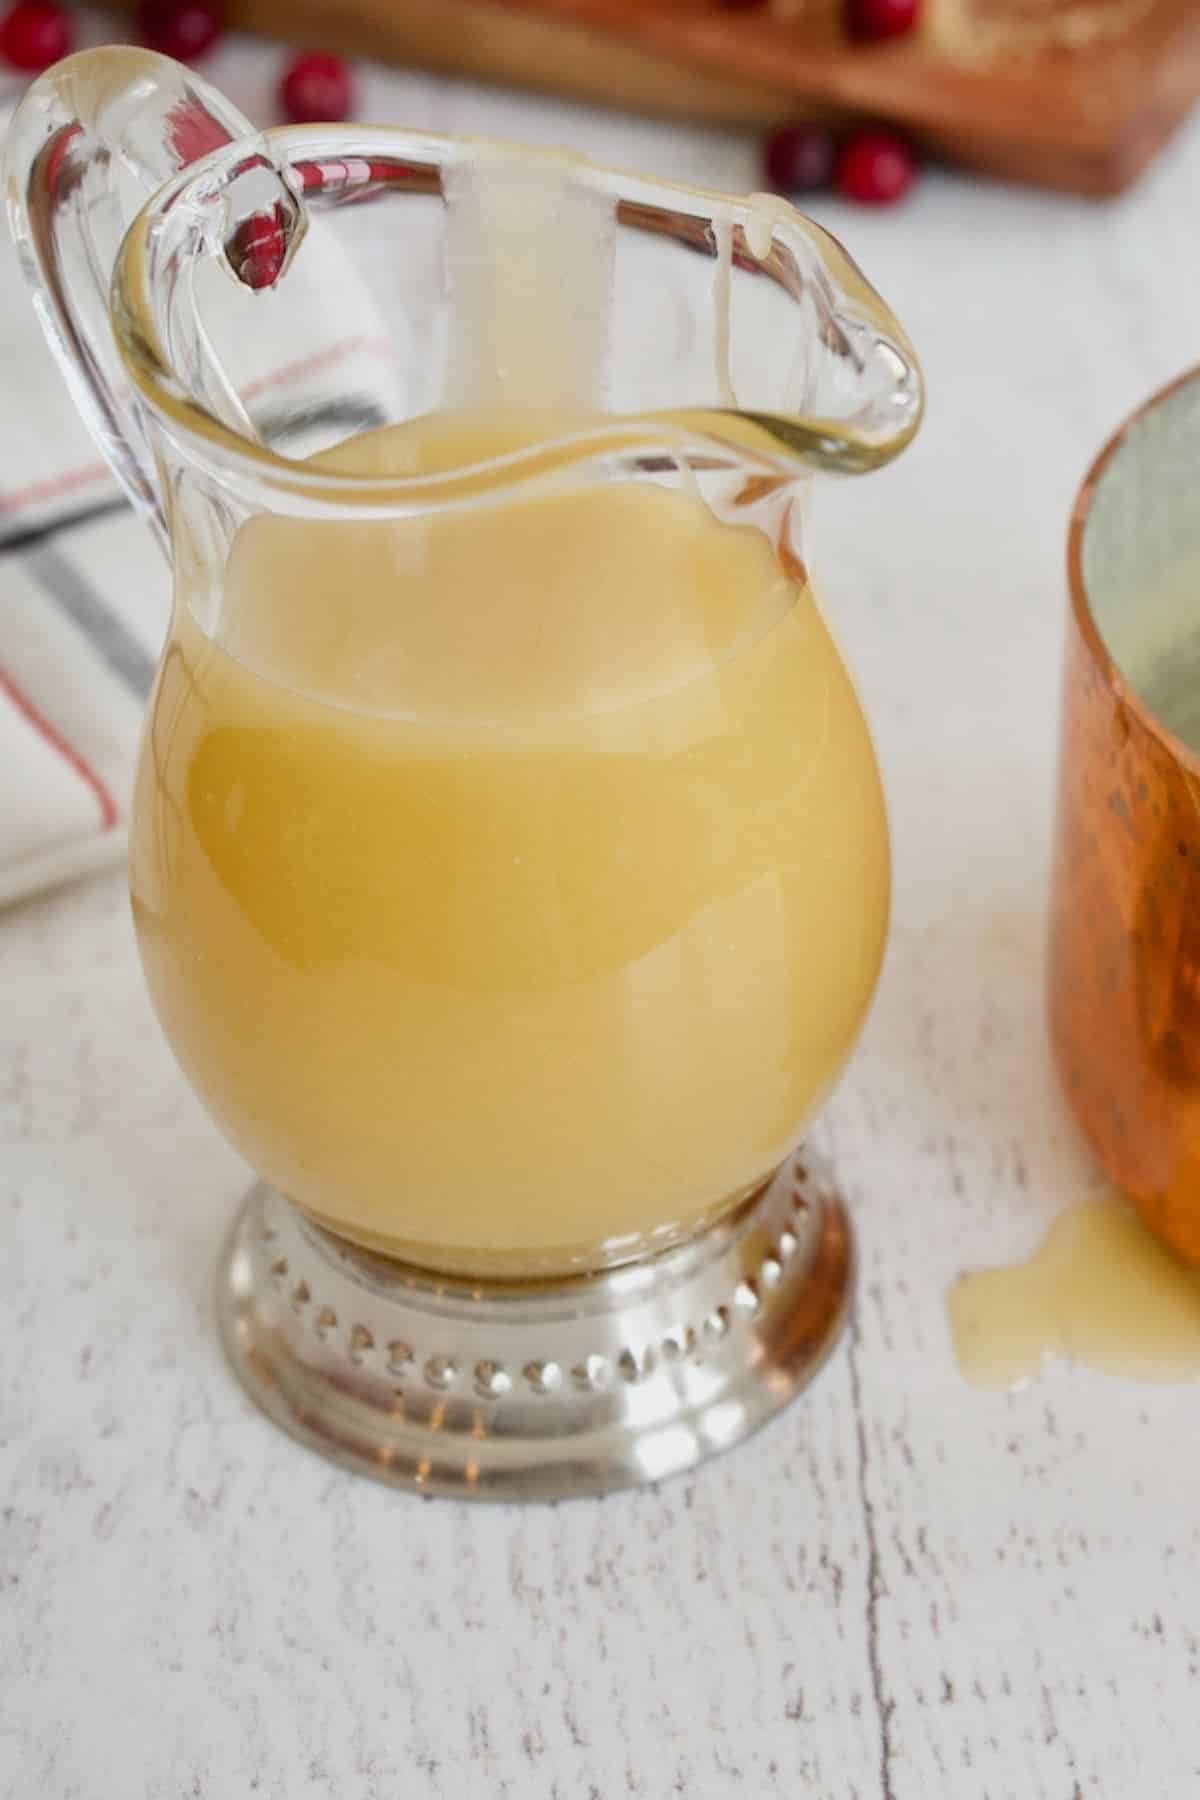 Vanilla sauce in small glass pitcher.